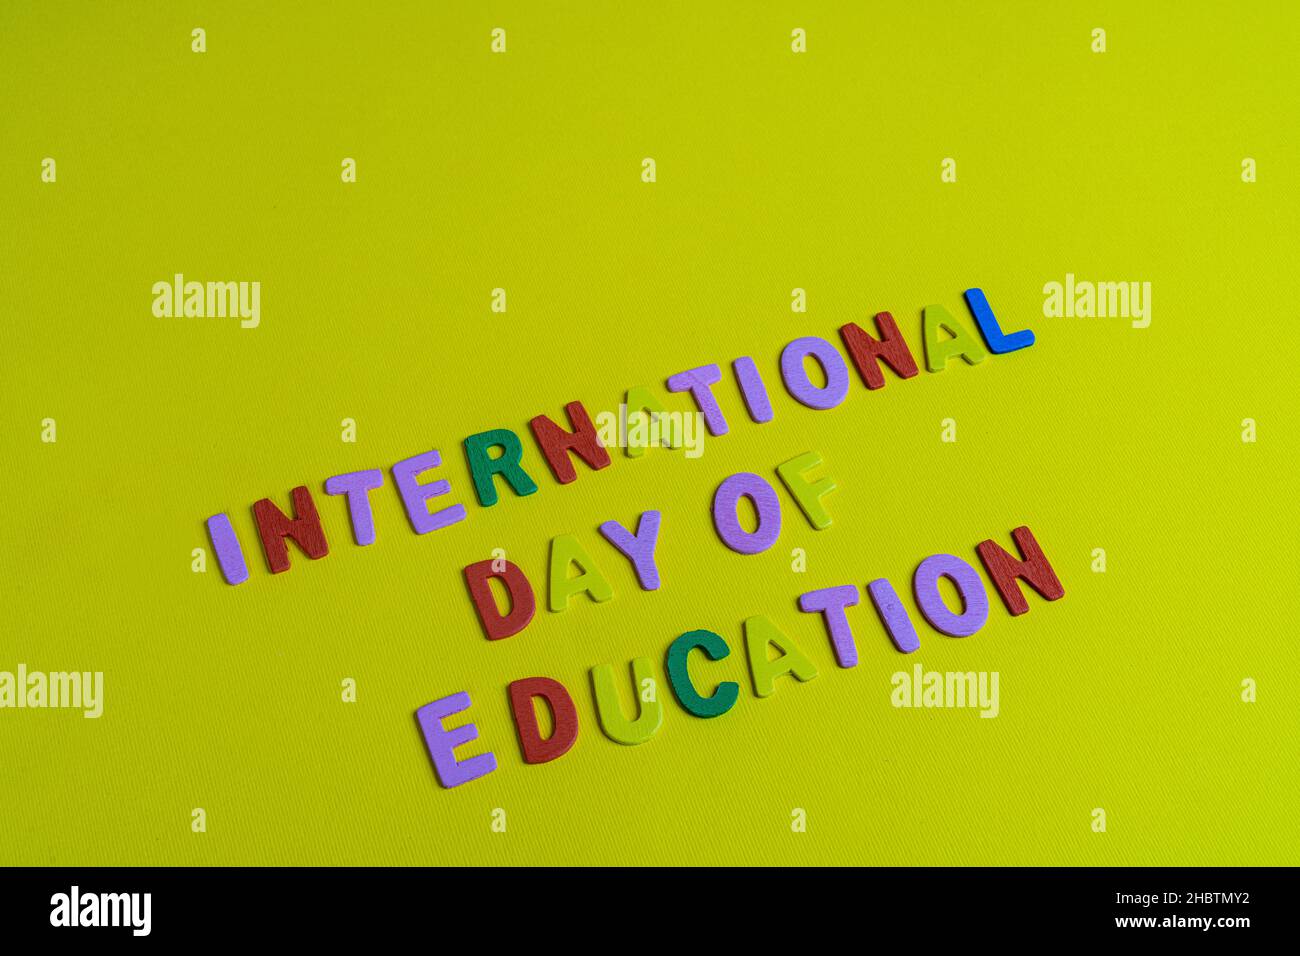 the phrase international day of education formed with colorful letters Stock Photo